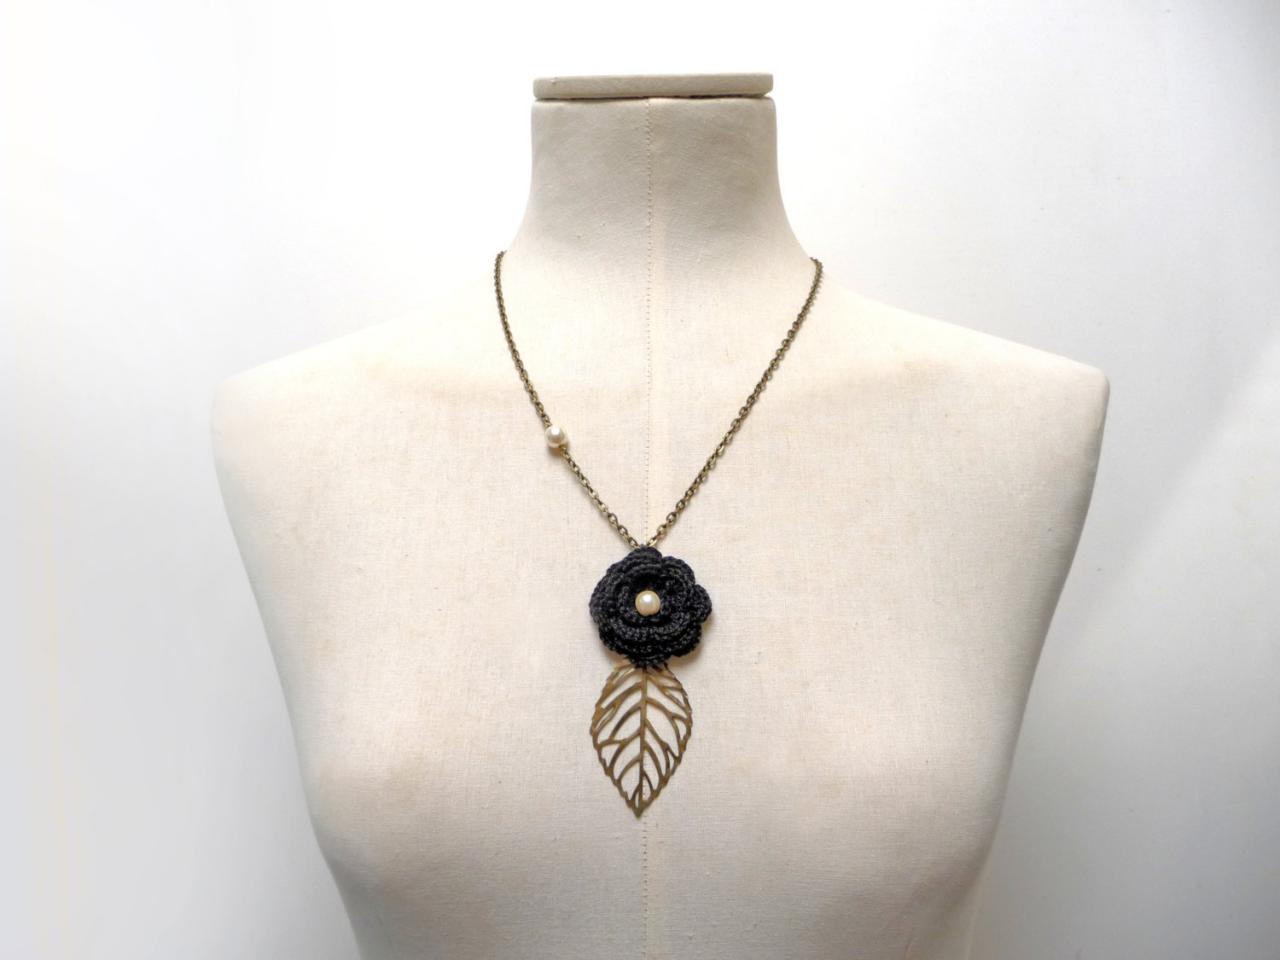 Black Flower Necklace With Brass Chain And Leaf - Crochet Cotton Flower With Pearls - Choose The Color